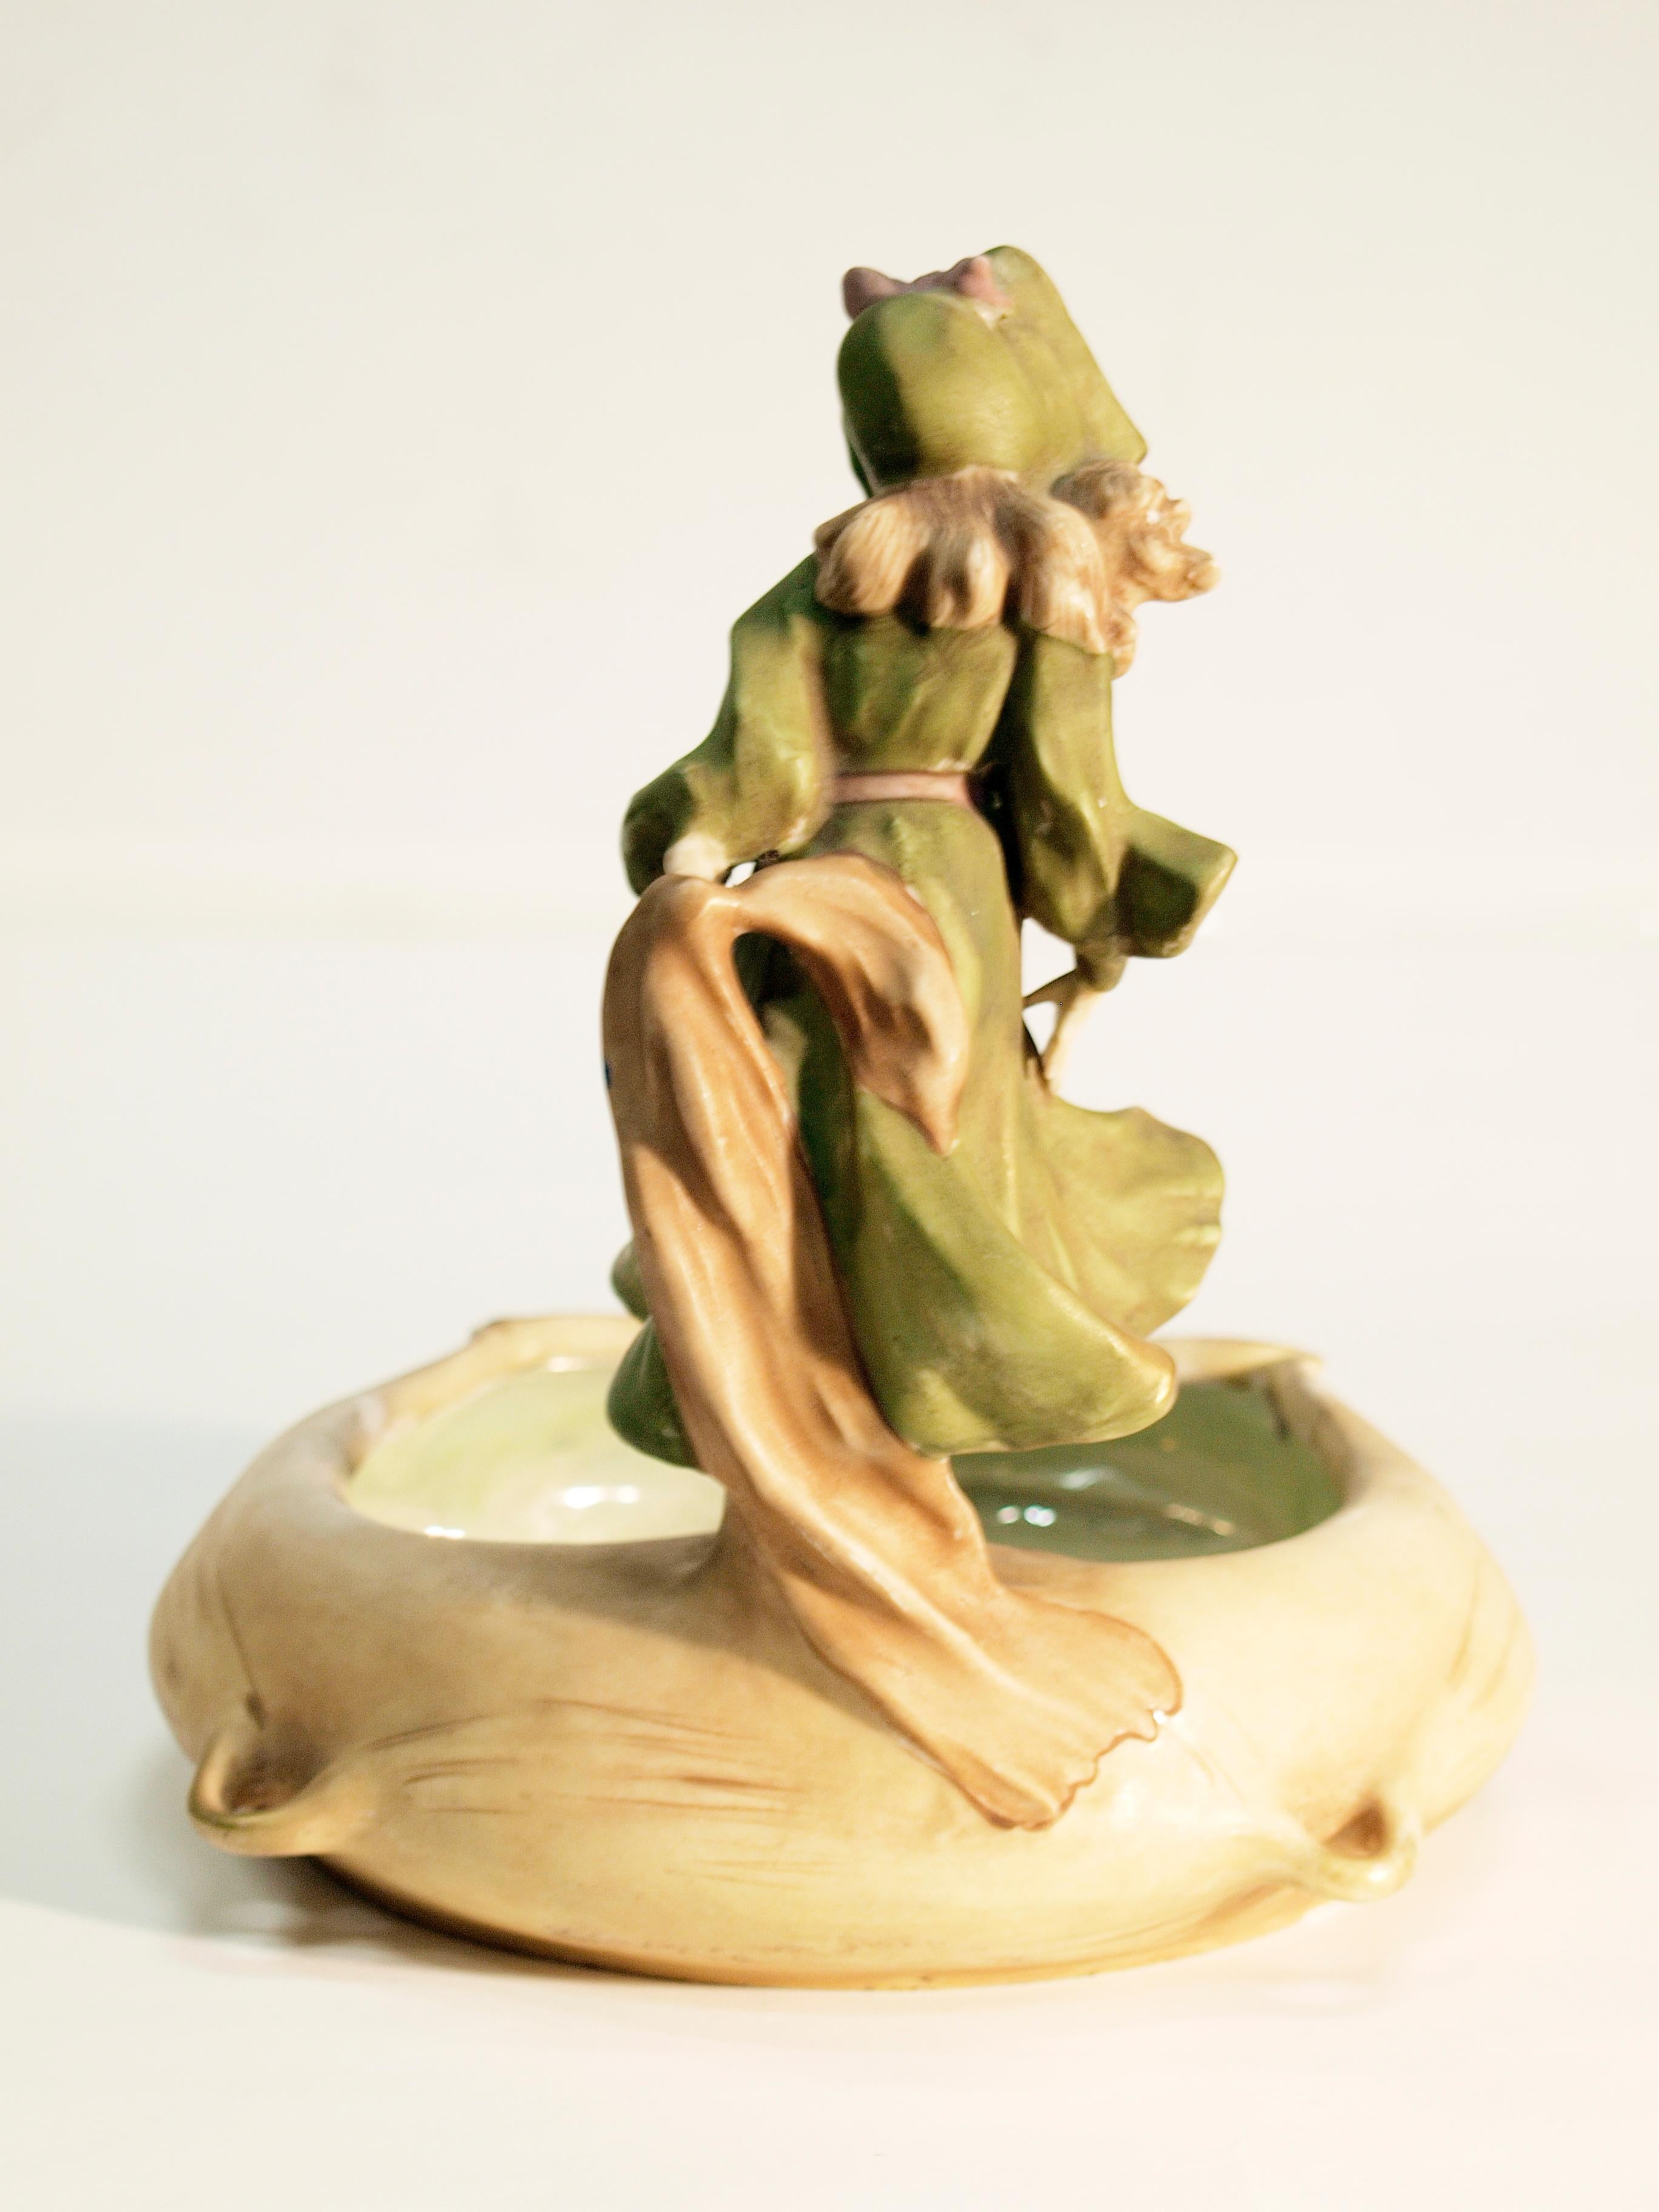 A bowl with a woman on top of it.